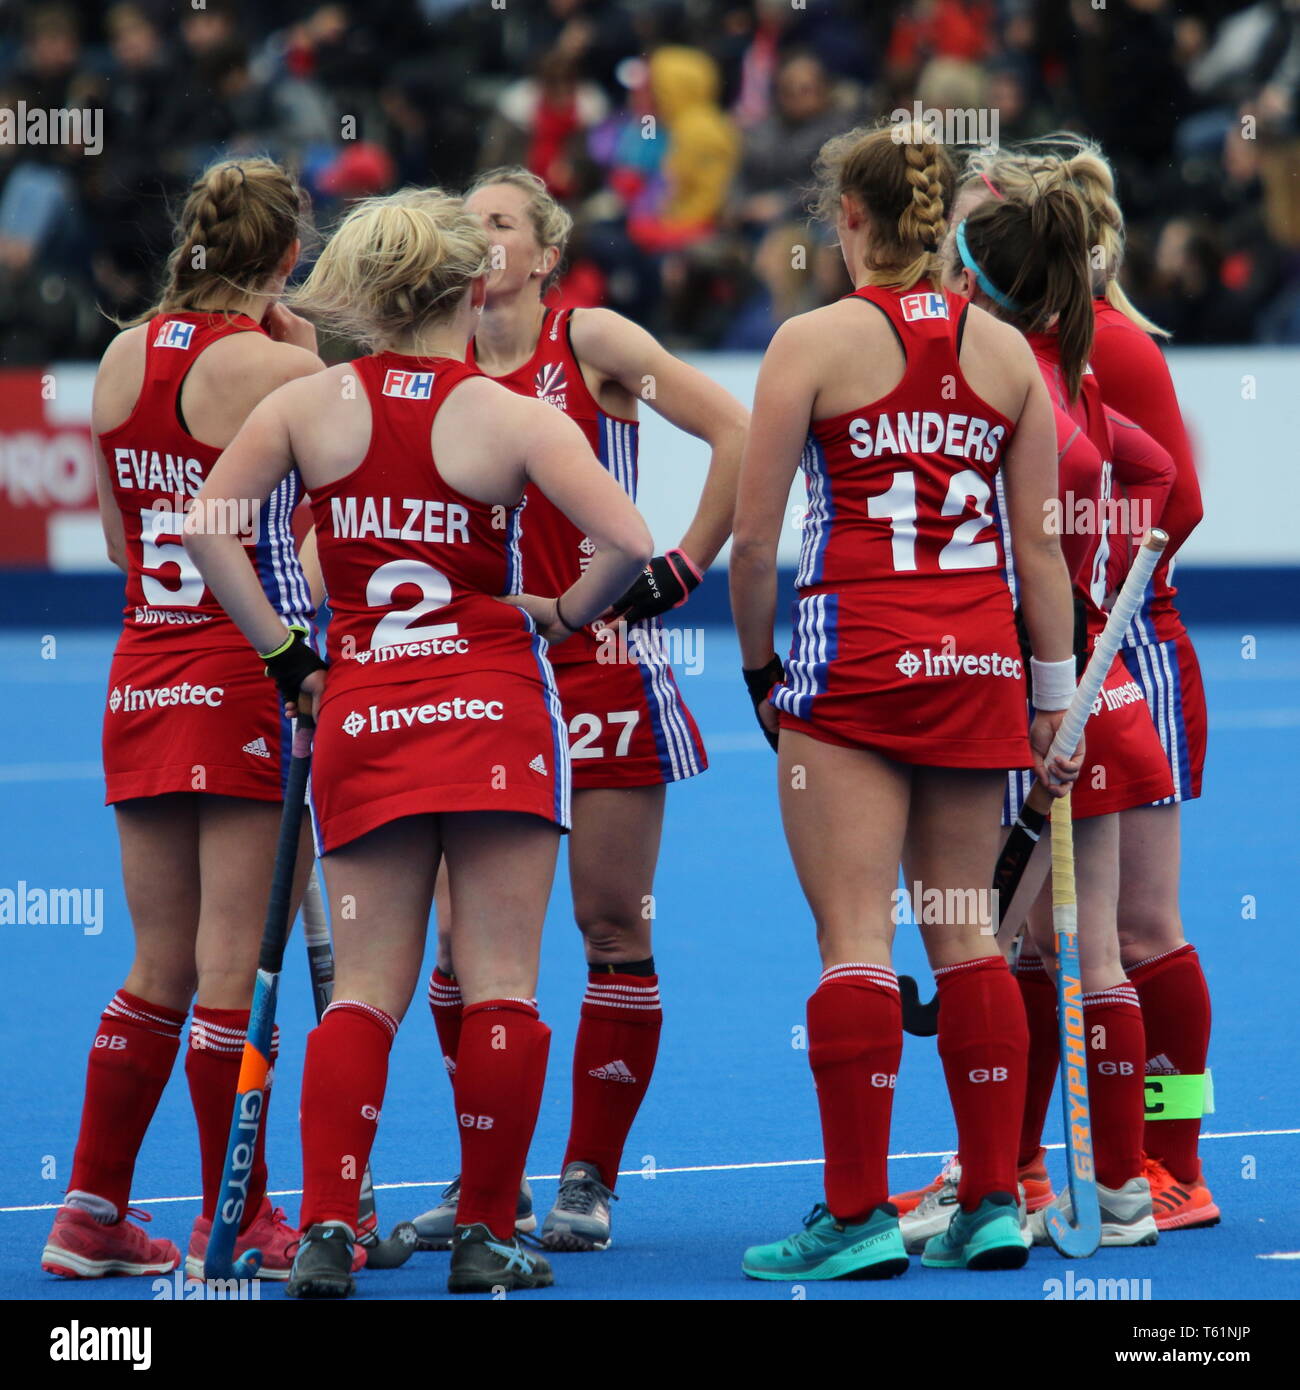 Team tatics in the 2019 FIH Pro League Great Britain v United States women’s hockey match at Queens Elizabeth Olympic Park, London. 27th April 2019. Stock Photo